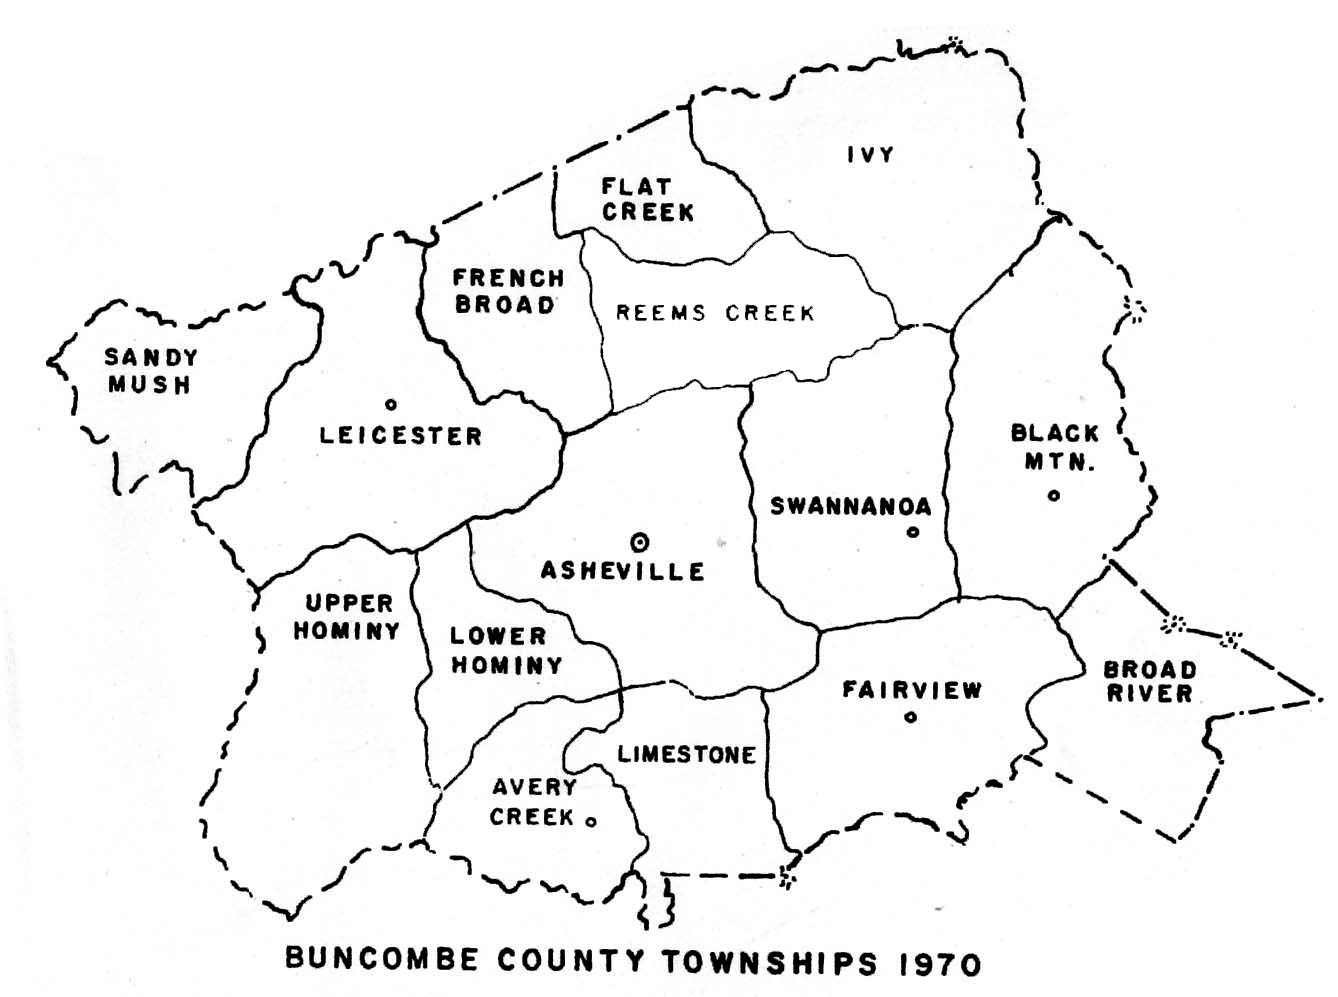 Buncombe County Townships